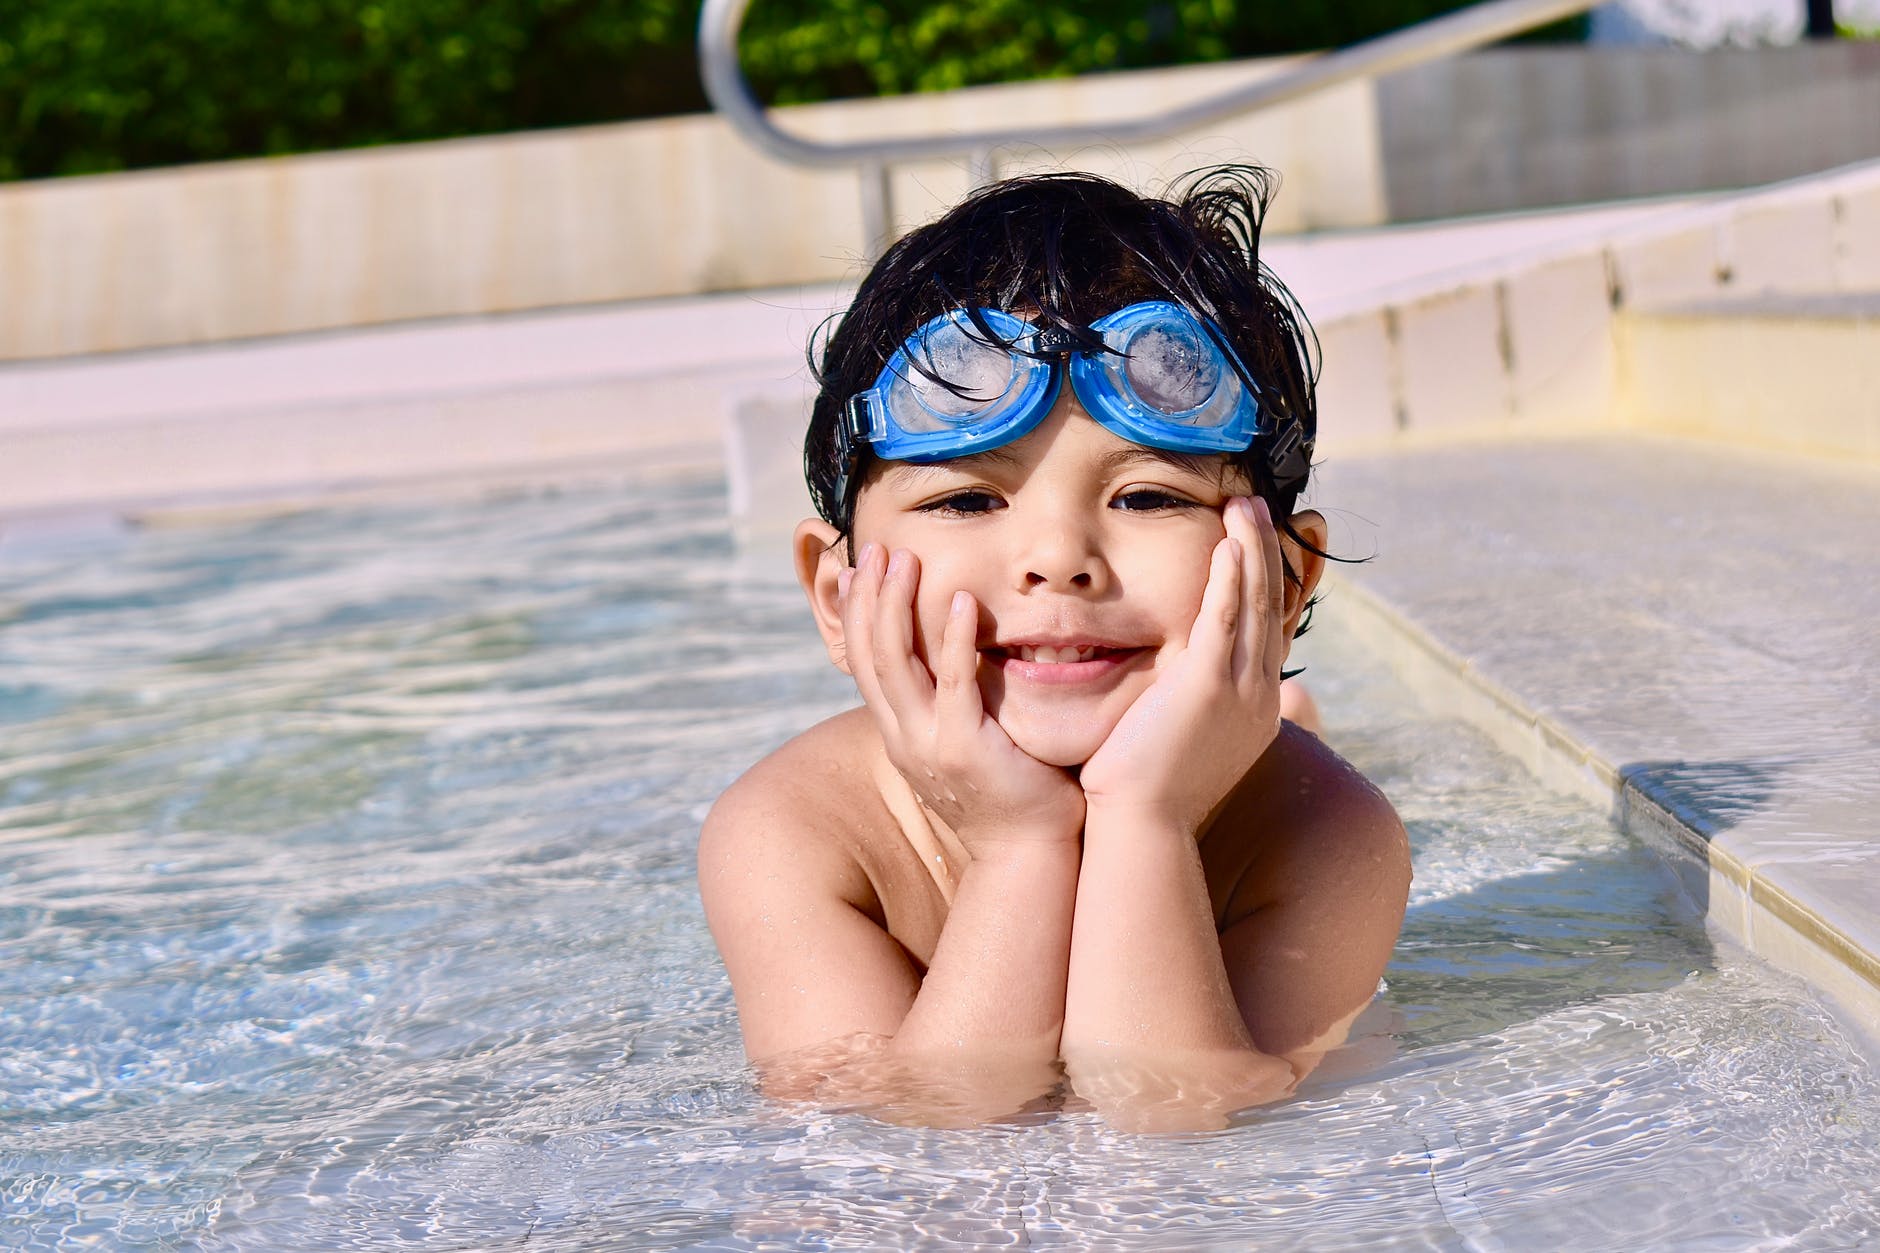 Go for a swim as a hot day family activity. 